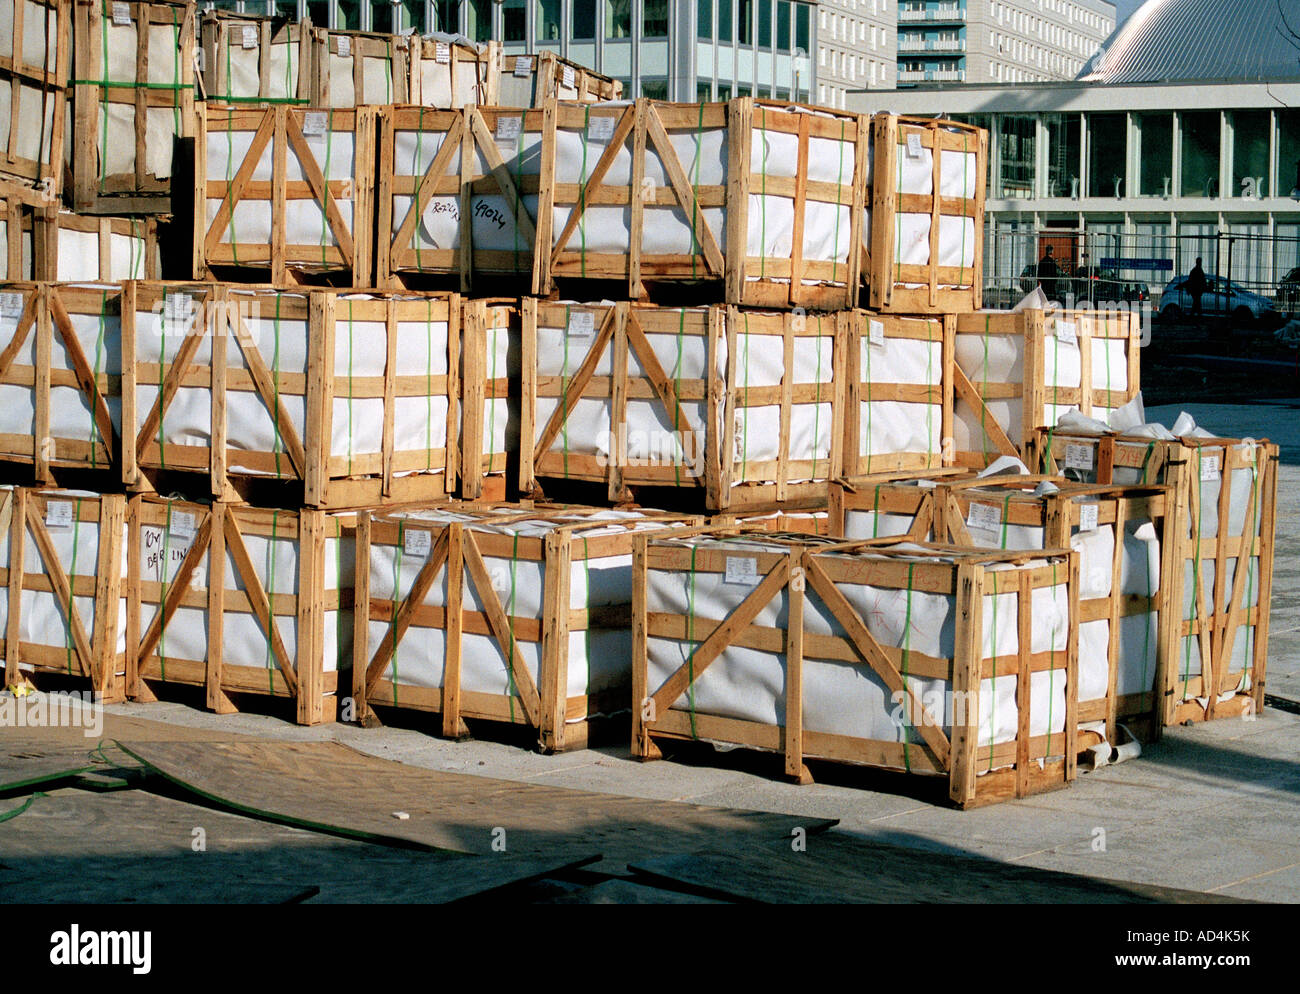 Stacks of wooden crates on a commercial dock Stock Photo - Alamy